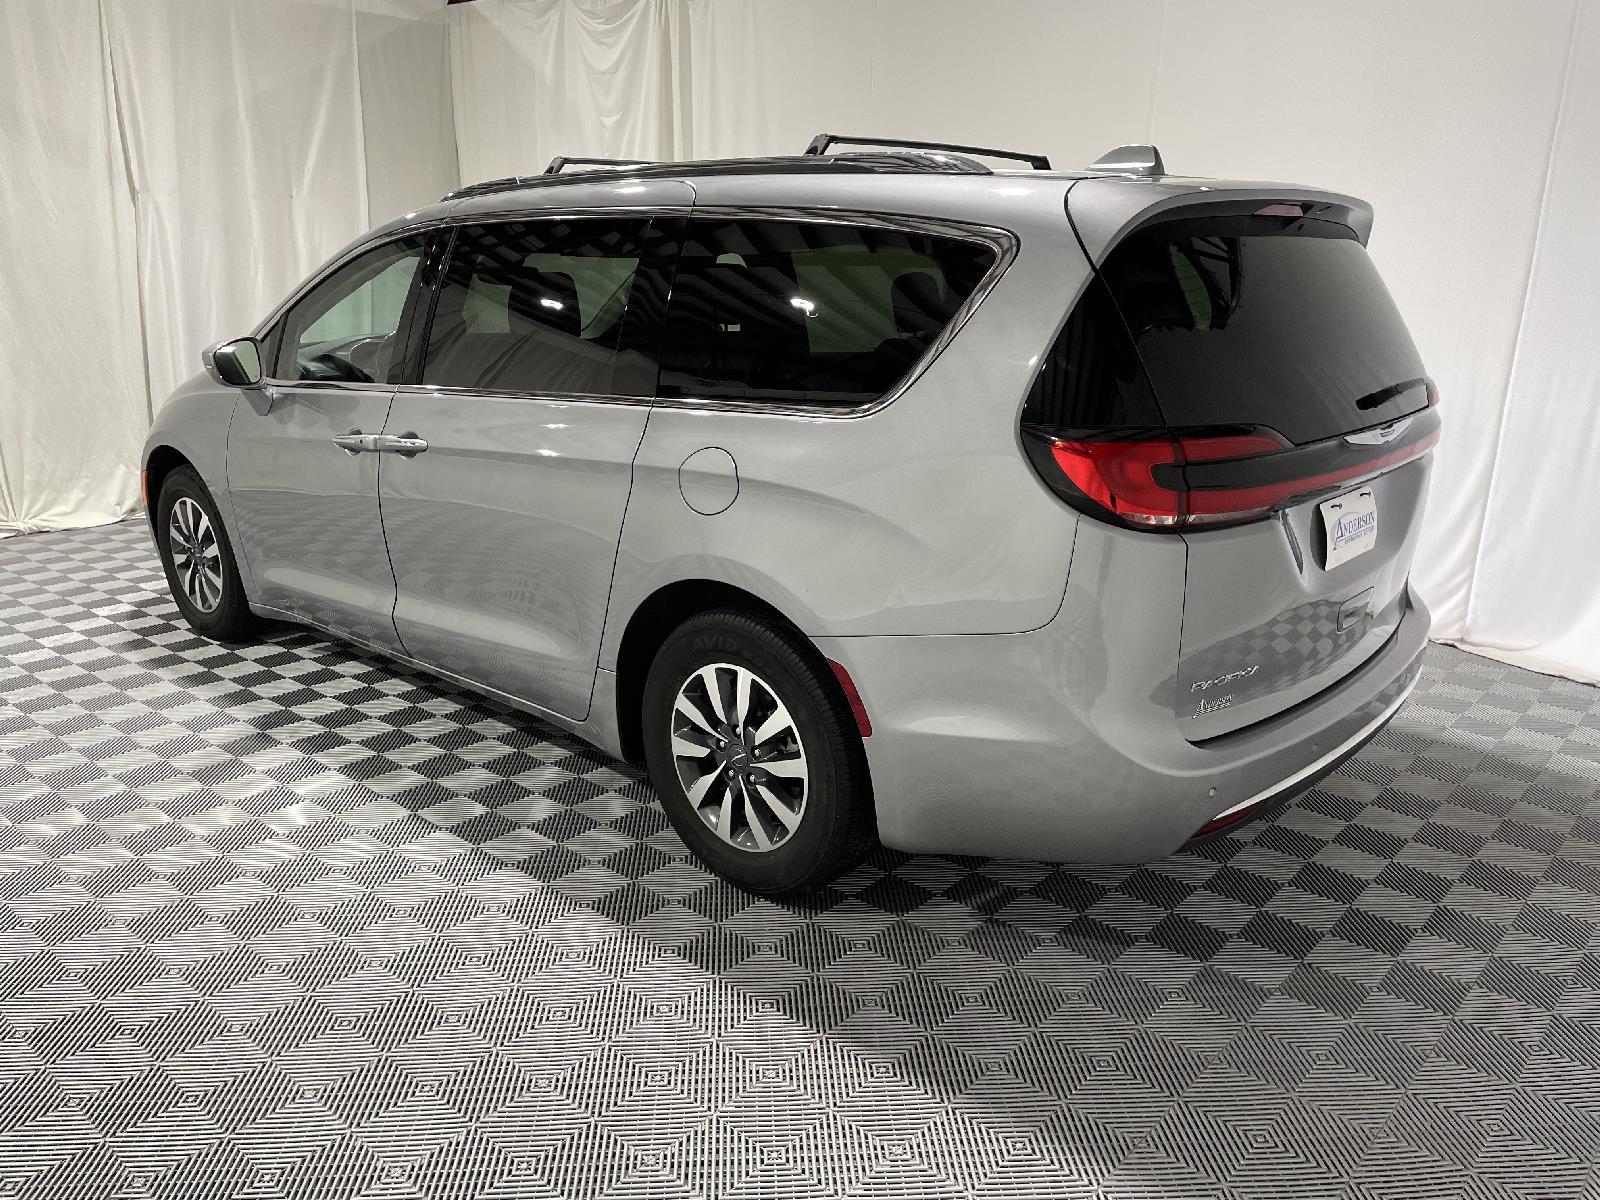 Used 2021 Chrysler Pacifica Touring L Minivans for sale in St Joseph MO